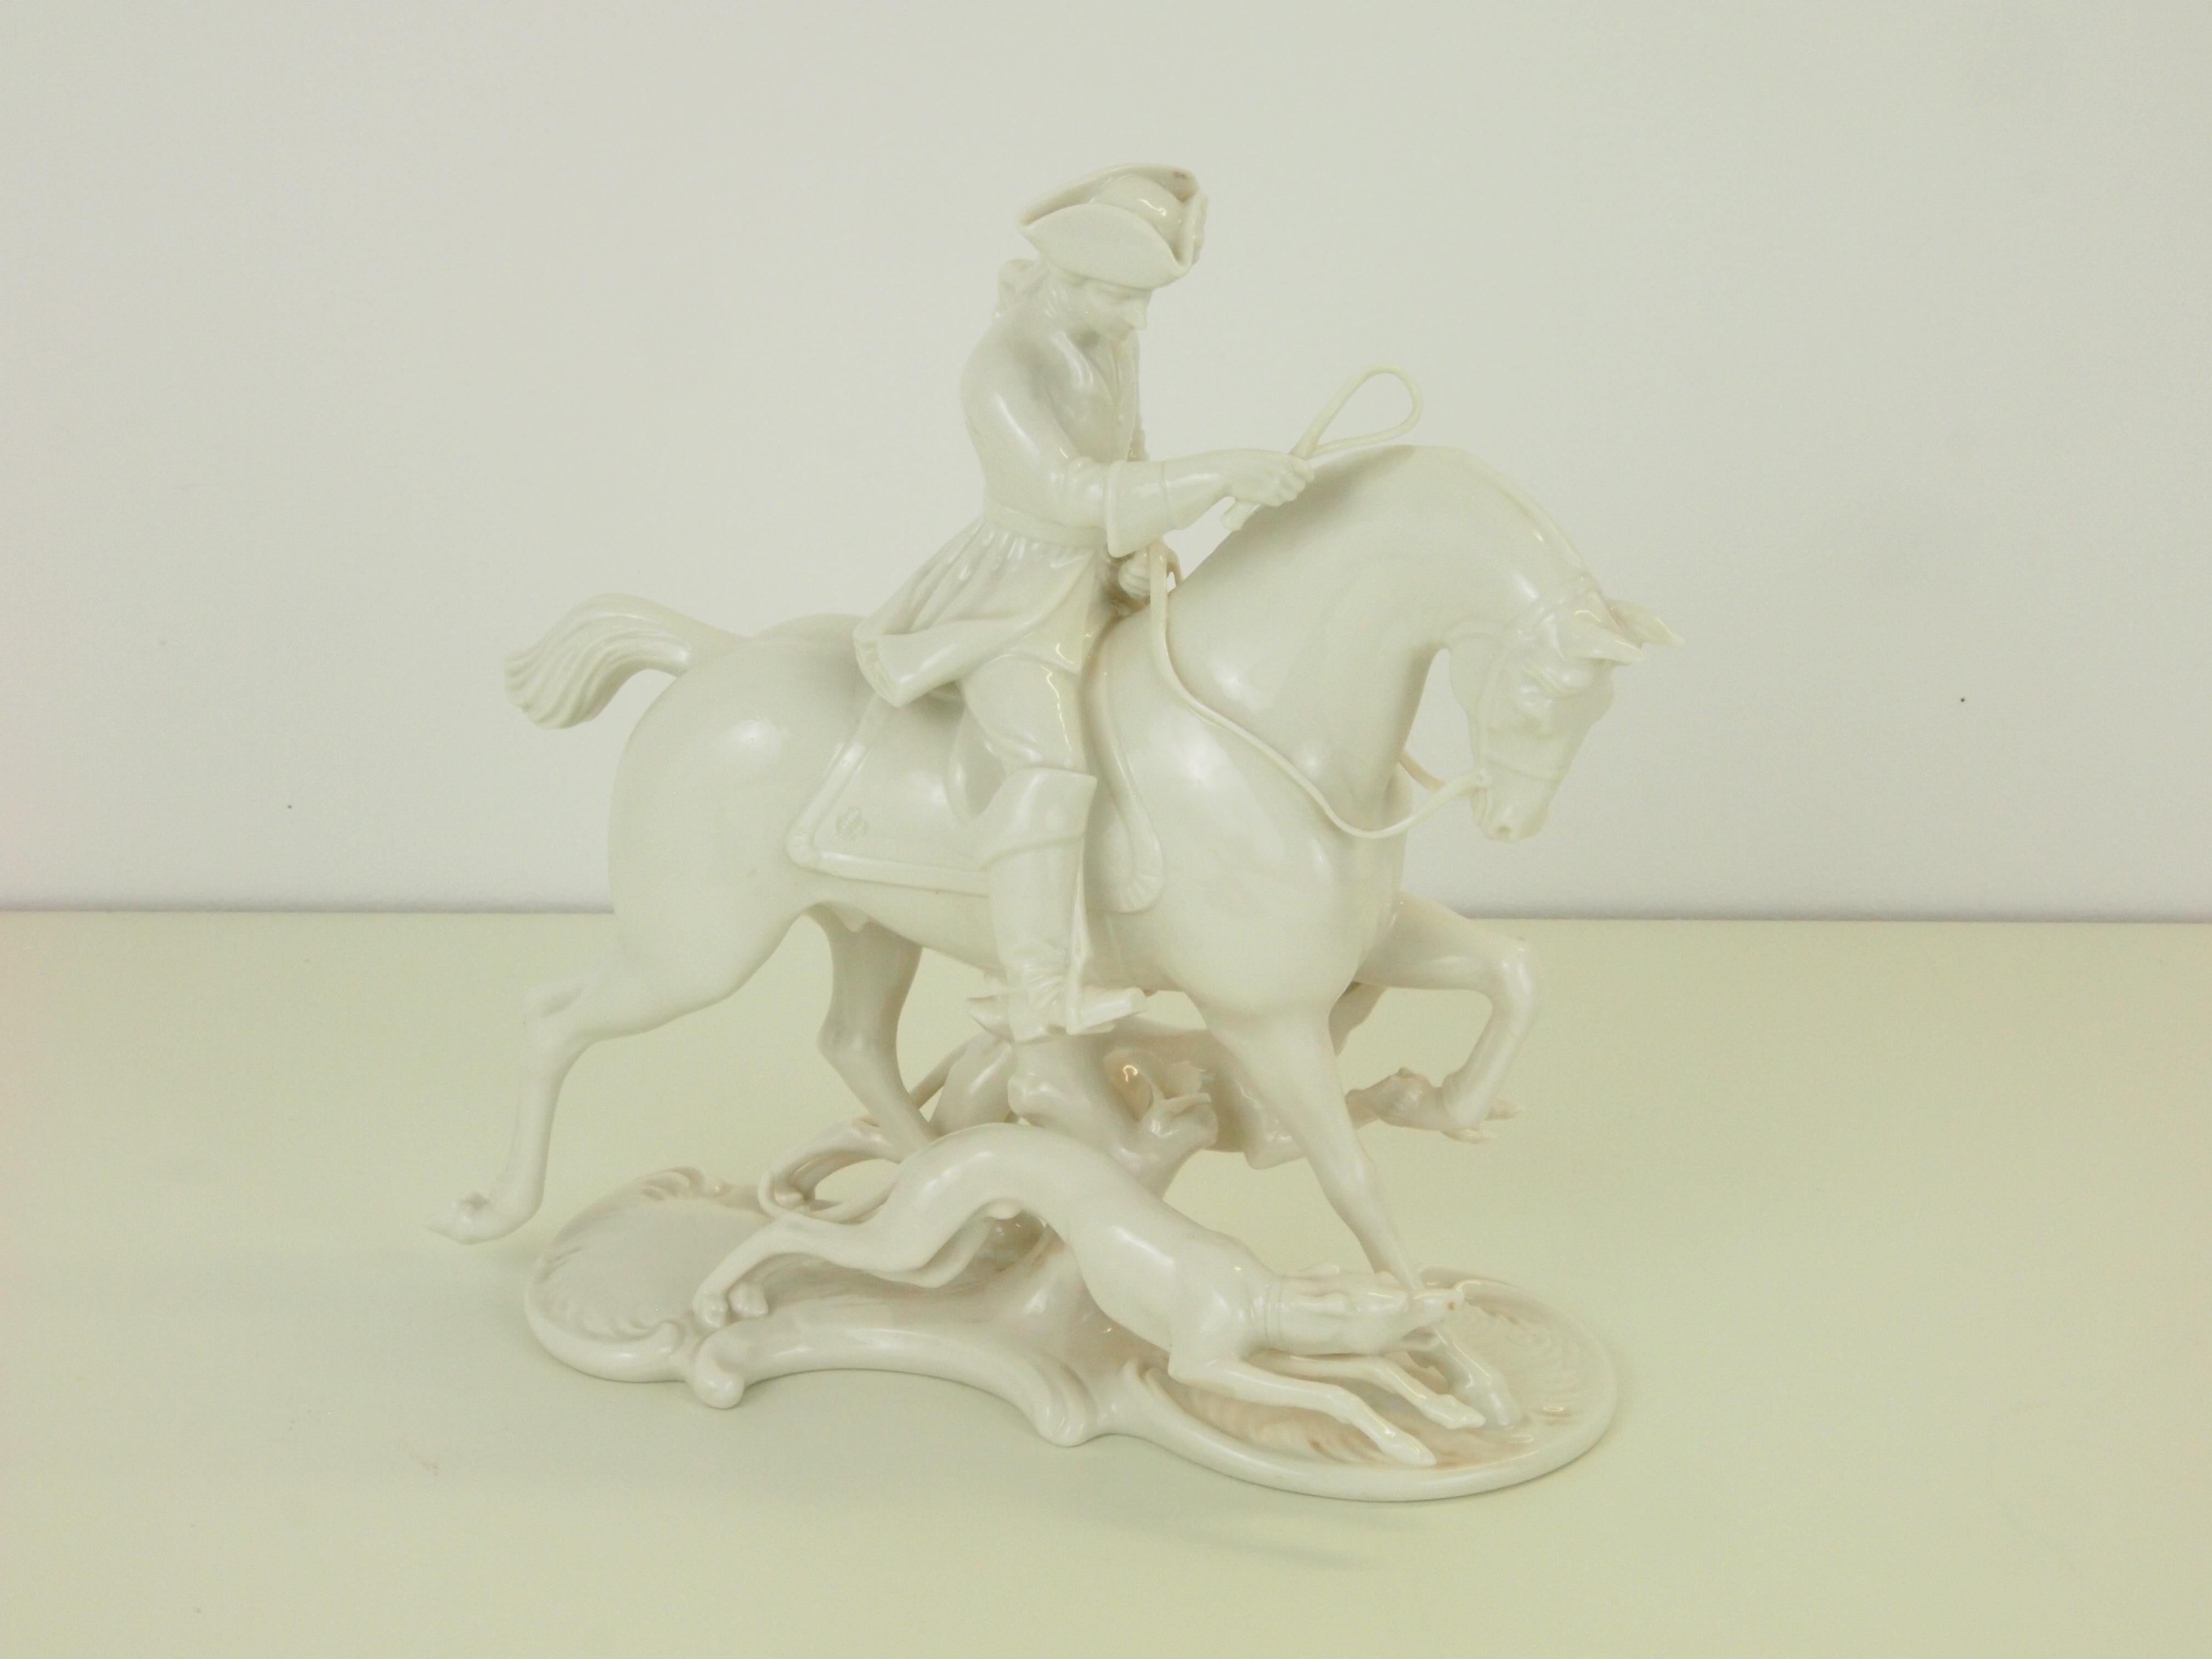 Nymphenburg Porcelain Figurine Depicting a Horse Rider in a Hunting Scene For Sale 10